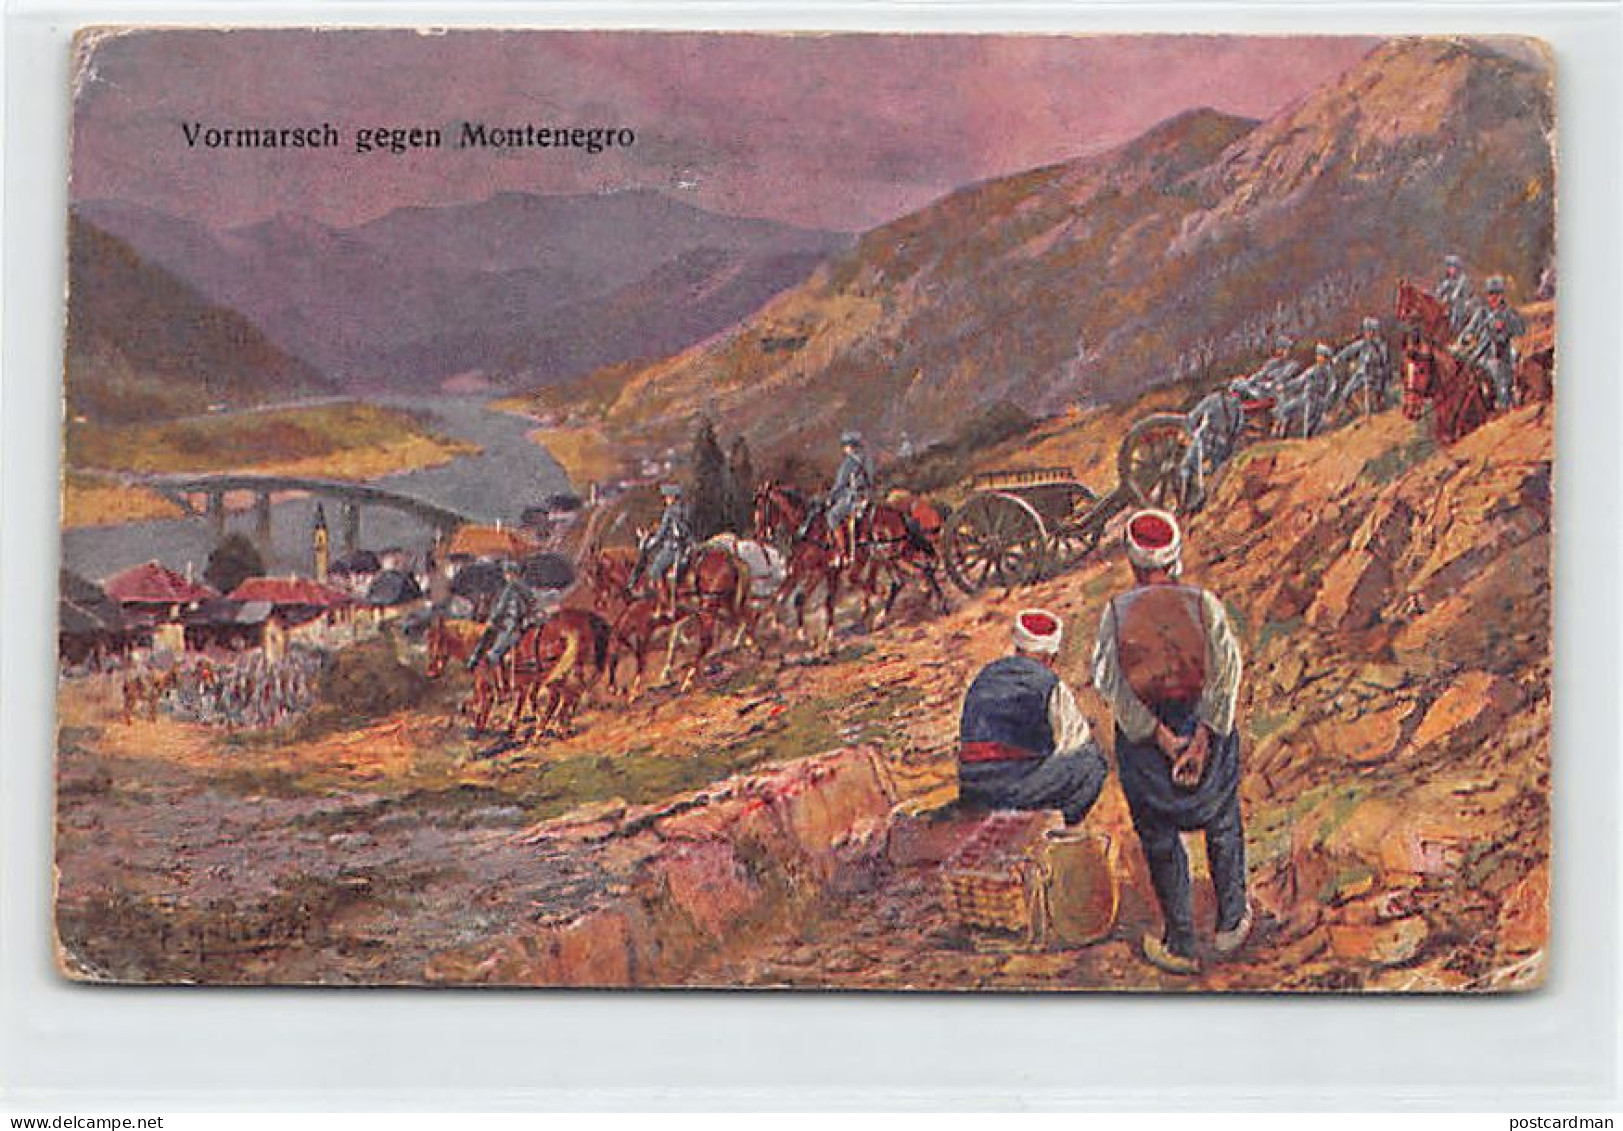 MONTENEGRO - Advance Of Austrian Troops At The Begining Of World War One - SEE POSTMARKS - Montenegro